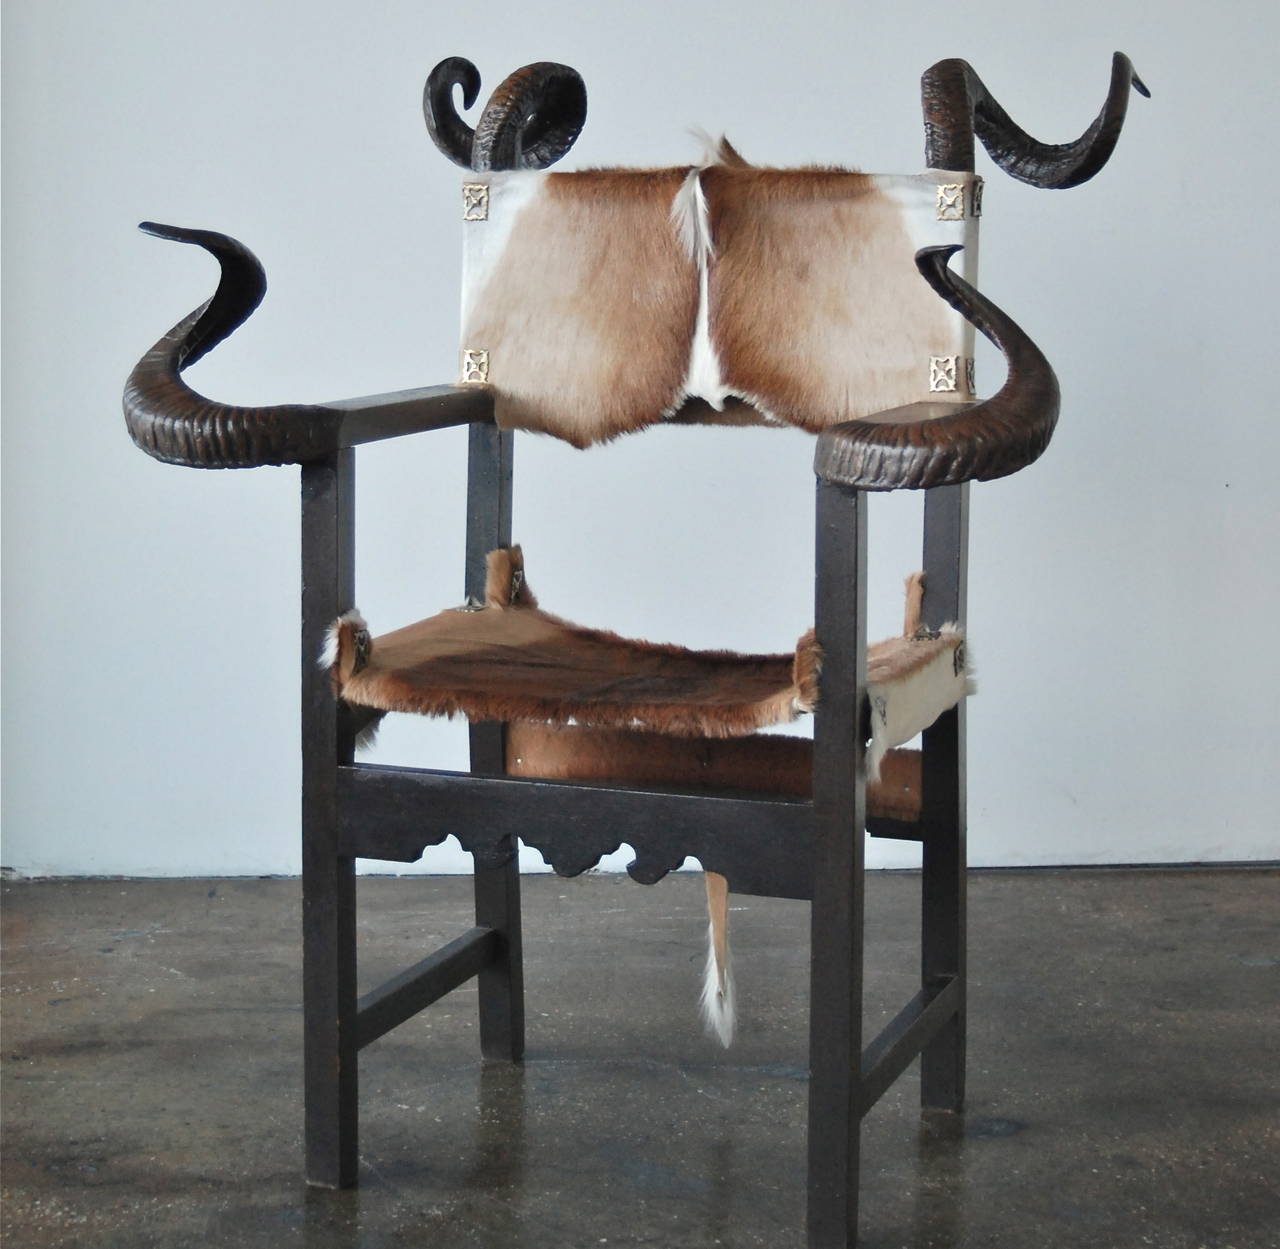 A chair by Gernot Rasenberger. Spain, circa late 20th century.
Pained wood, cow hide and horns with brass decoration.
Labelled: 